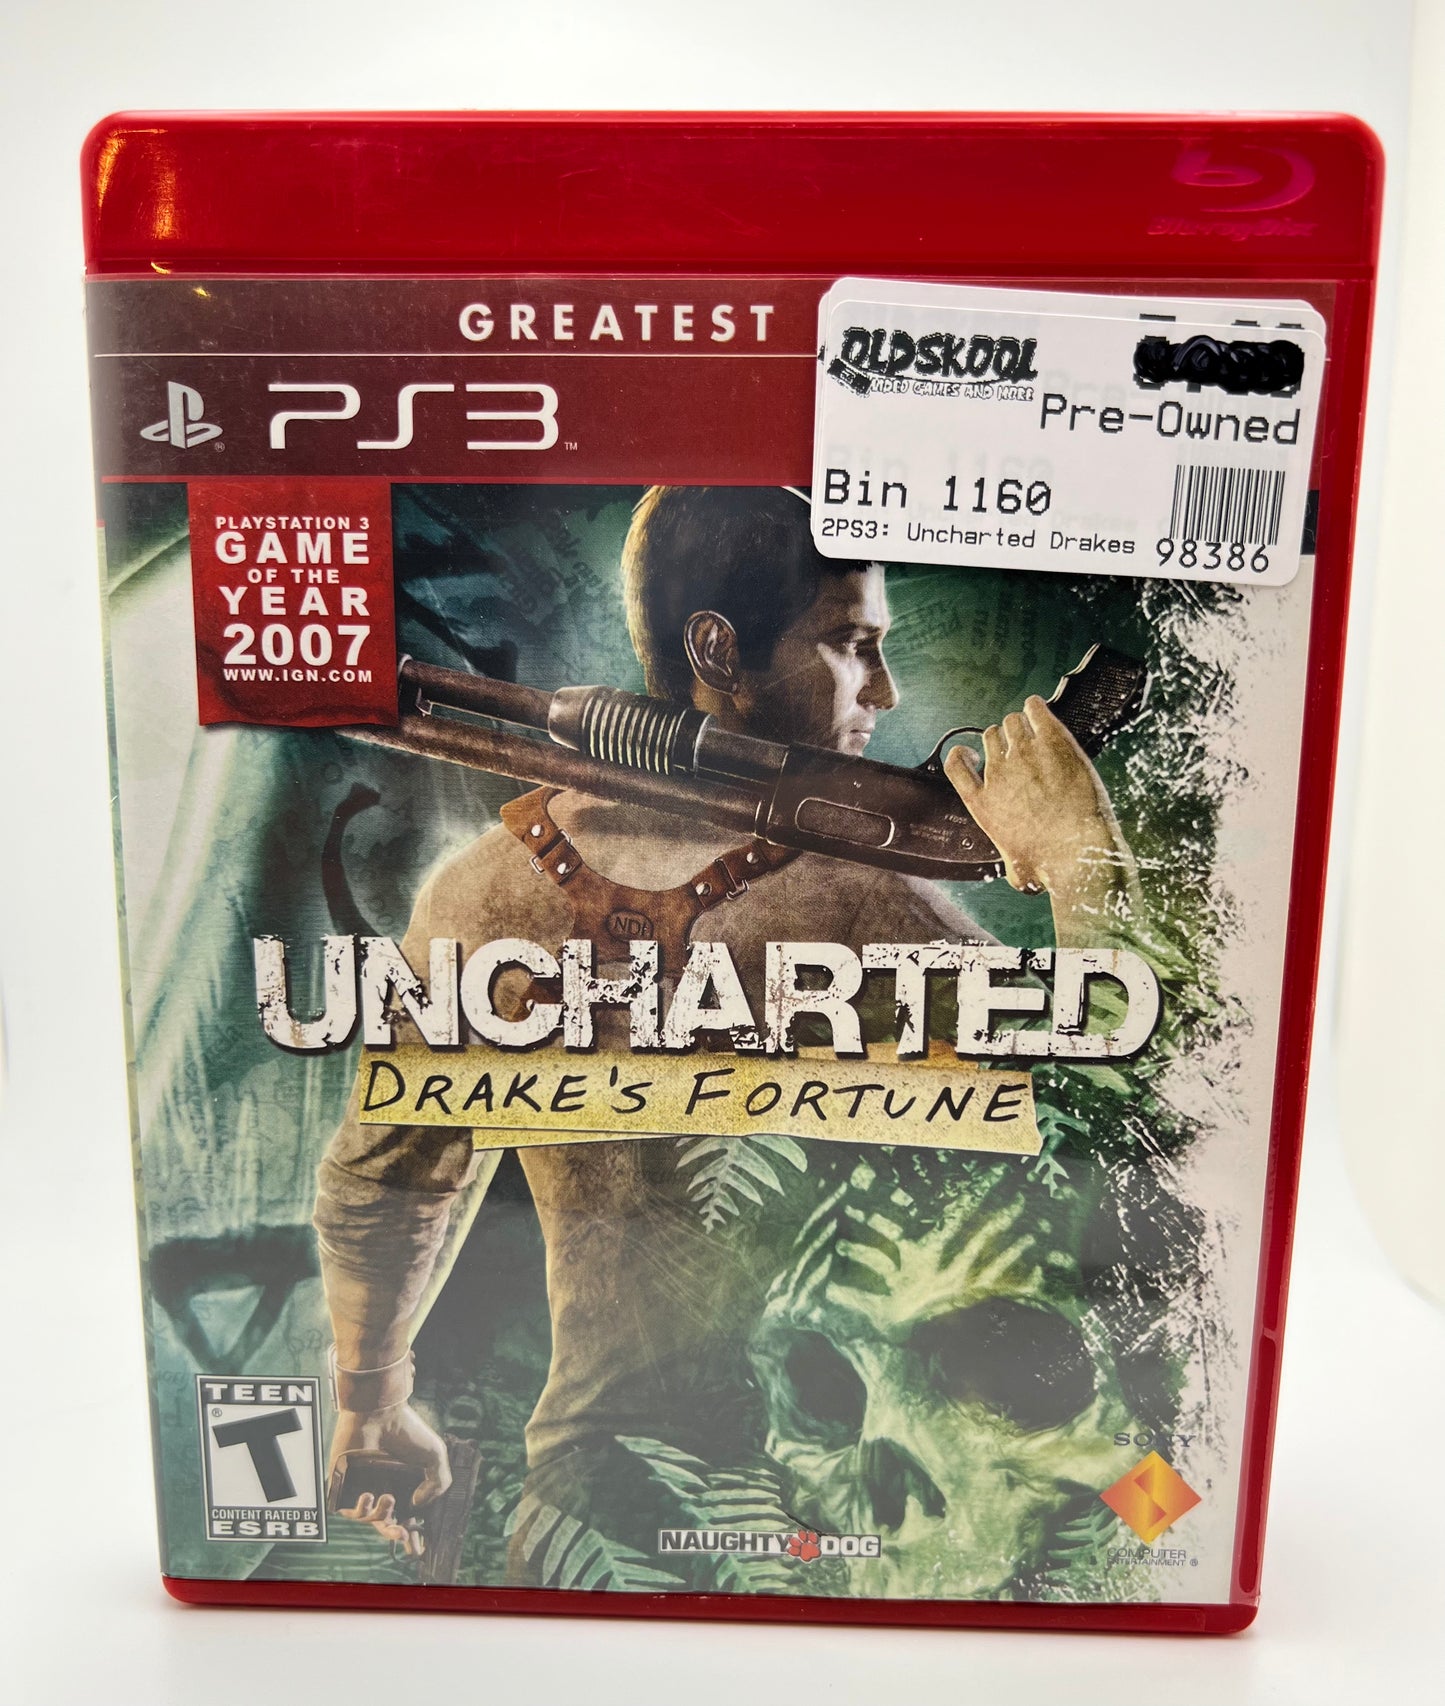 Uncharted Drakes Fortune - Playstation 3